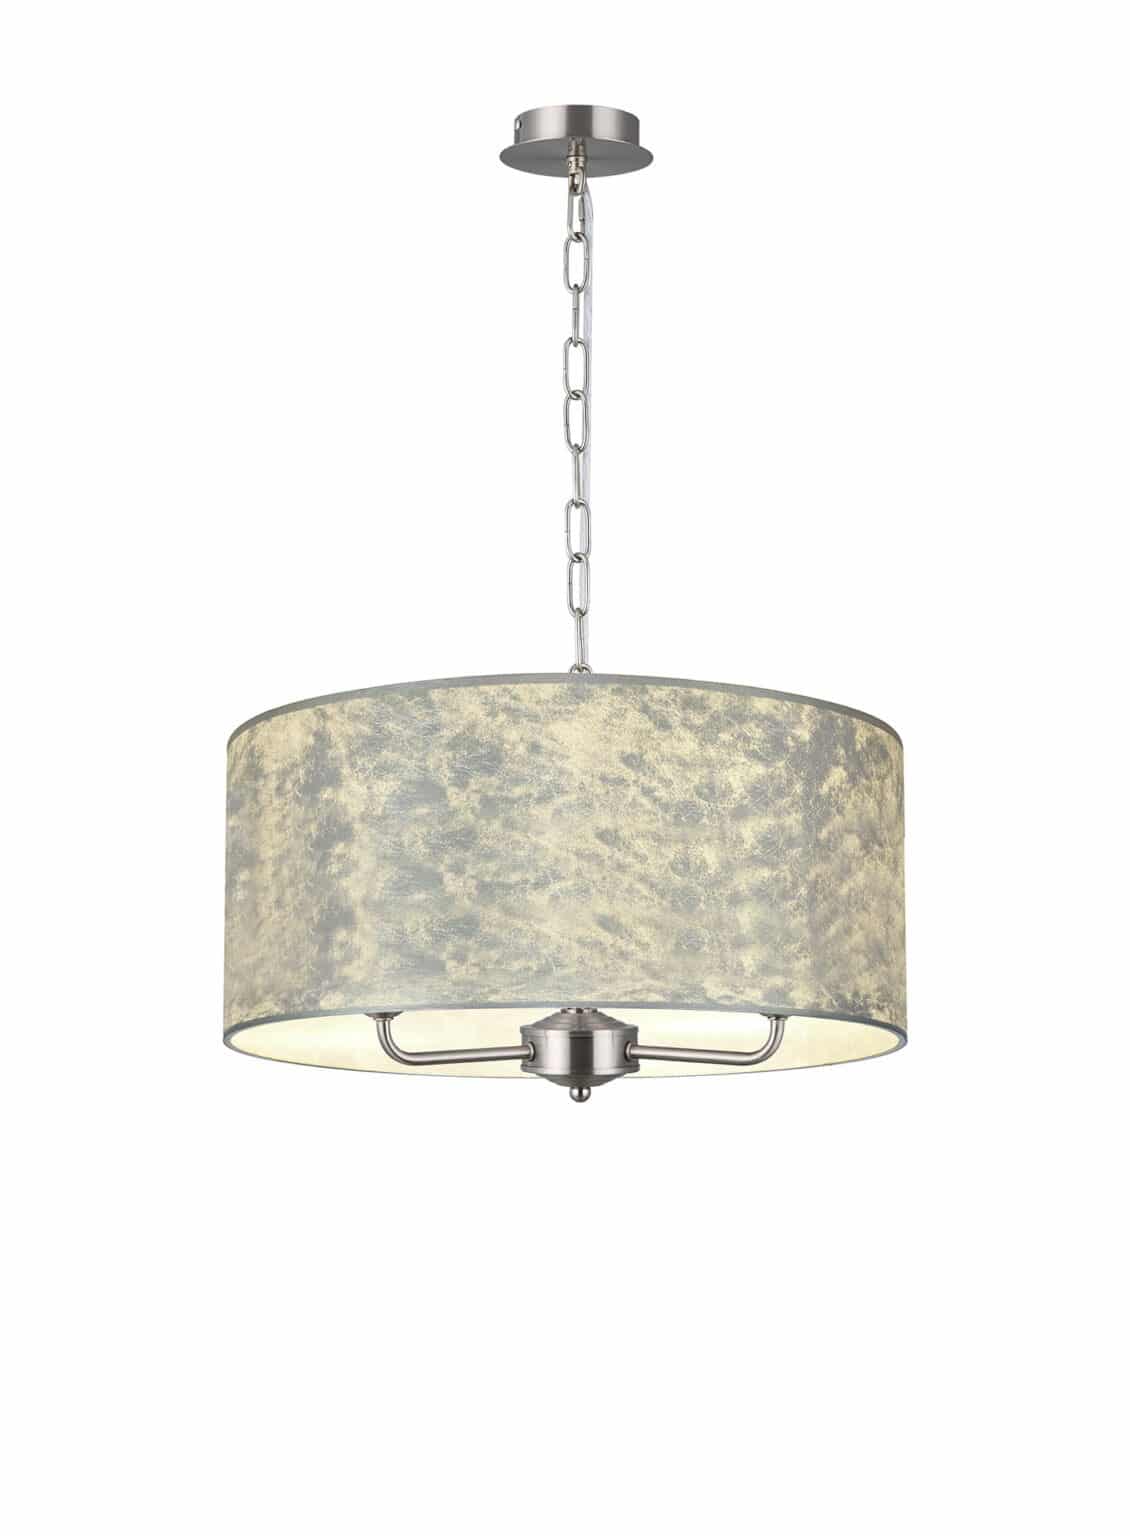 Satin Nickel/Silver Leaf With White Lining Shade